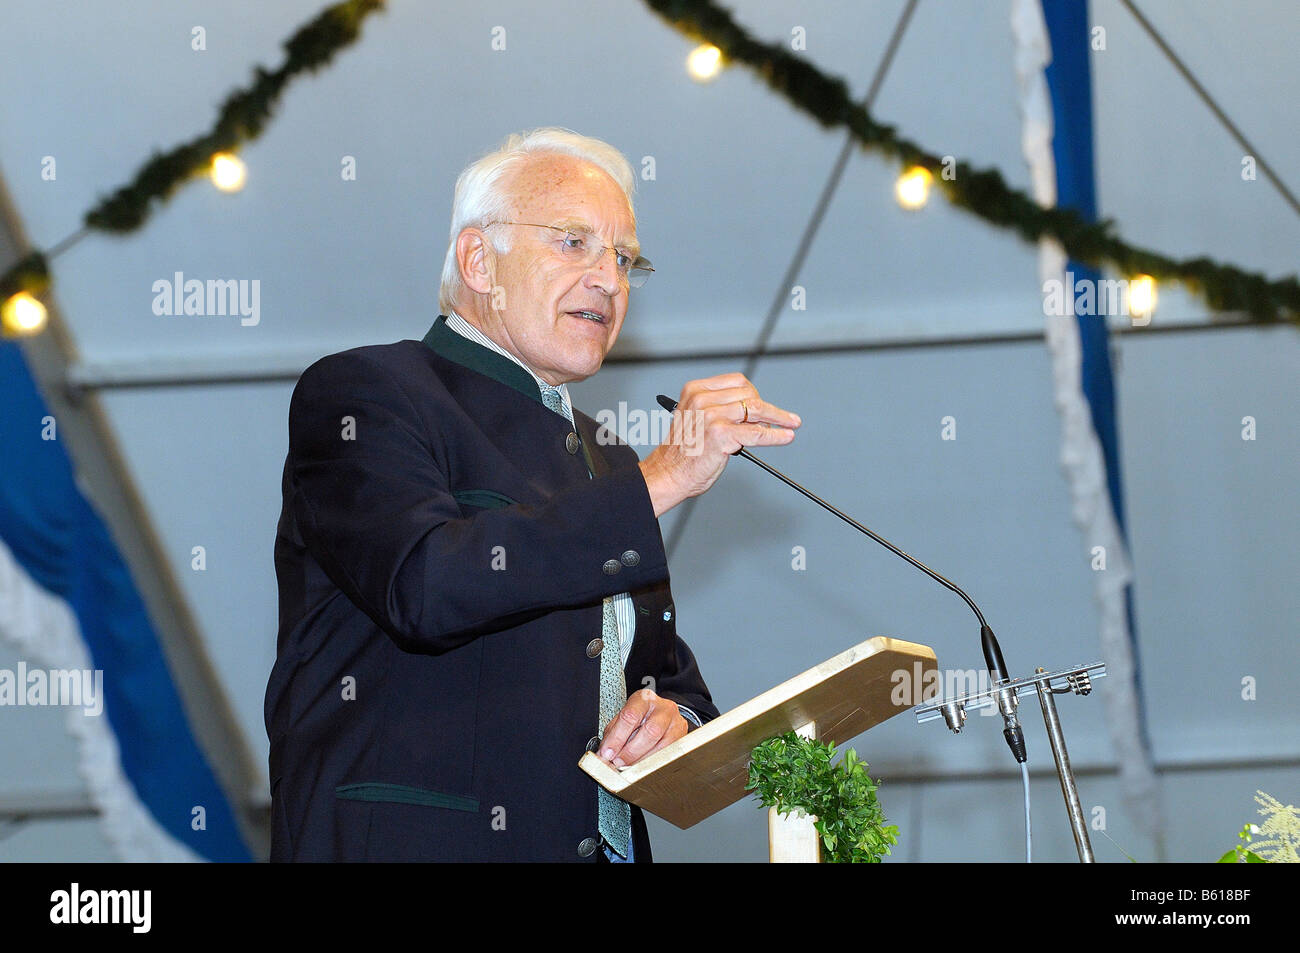 Dr. Edmund Stoiber holding a speech at a lectern in a beer tent, Grosshoehenrain, Upper Bavaria, Bavaria Stock Photo